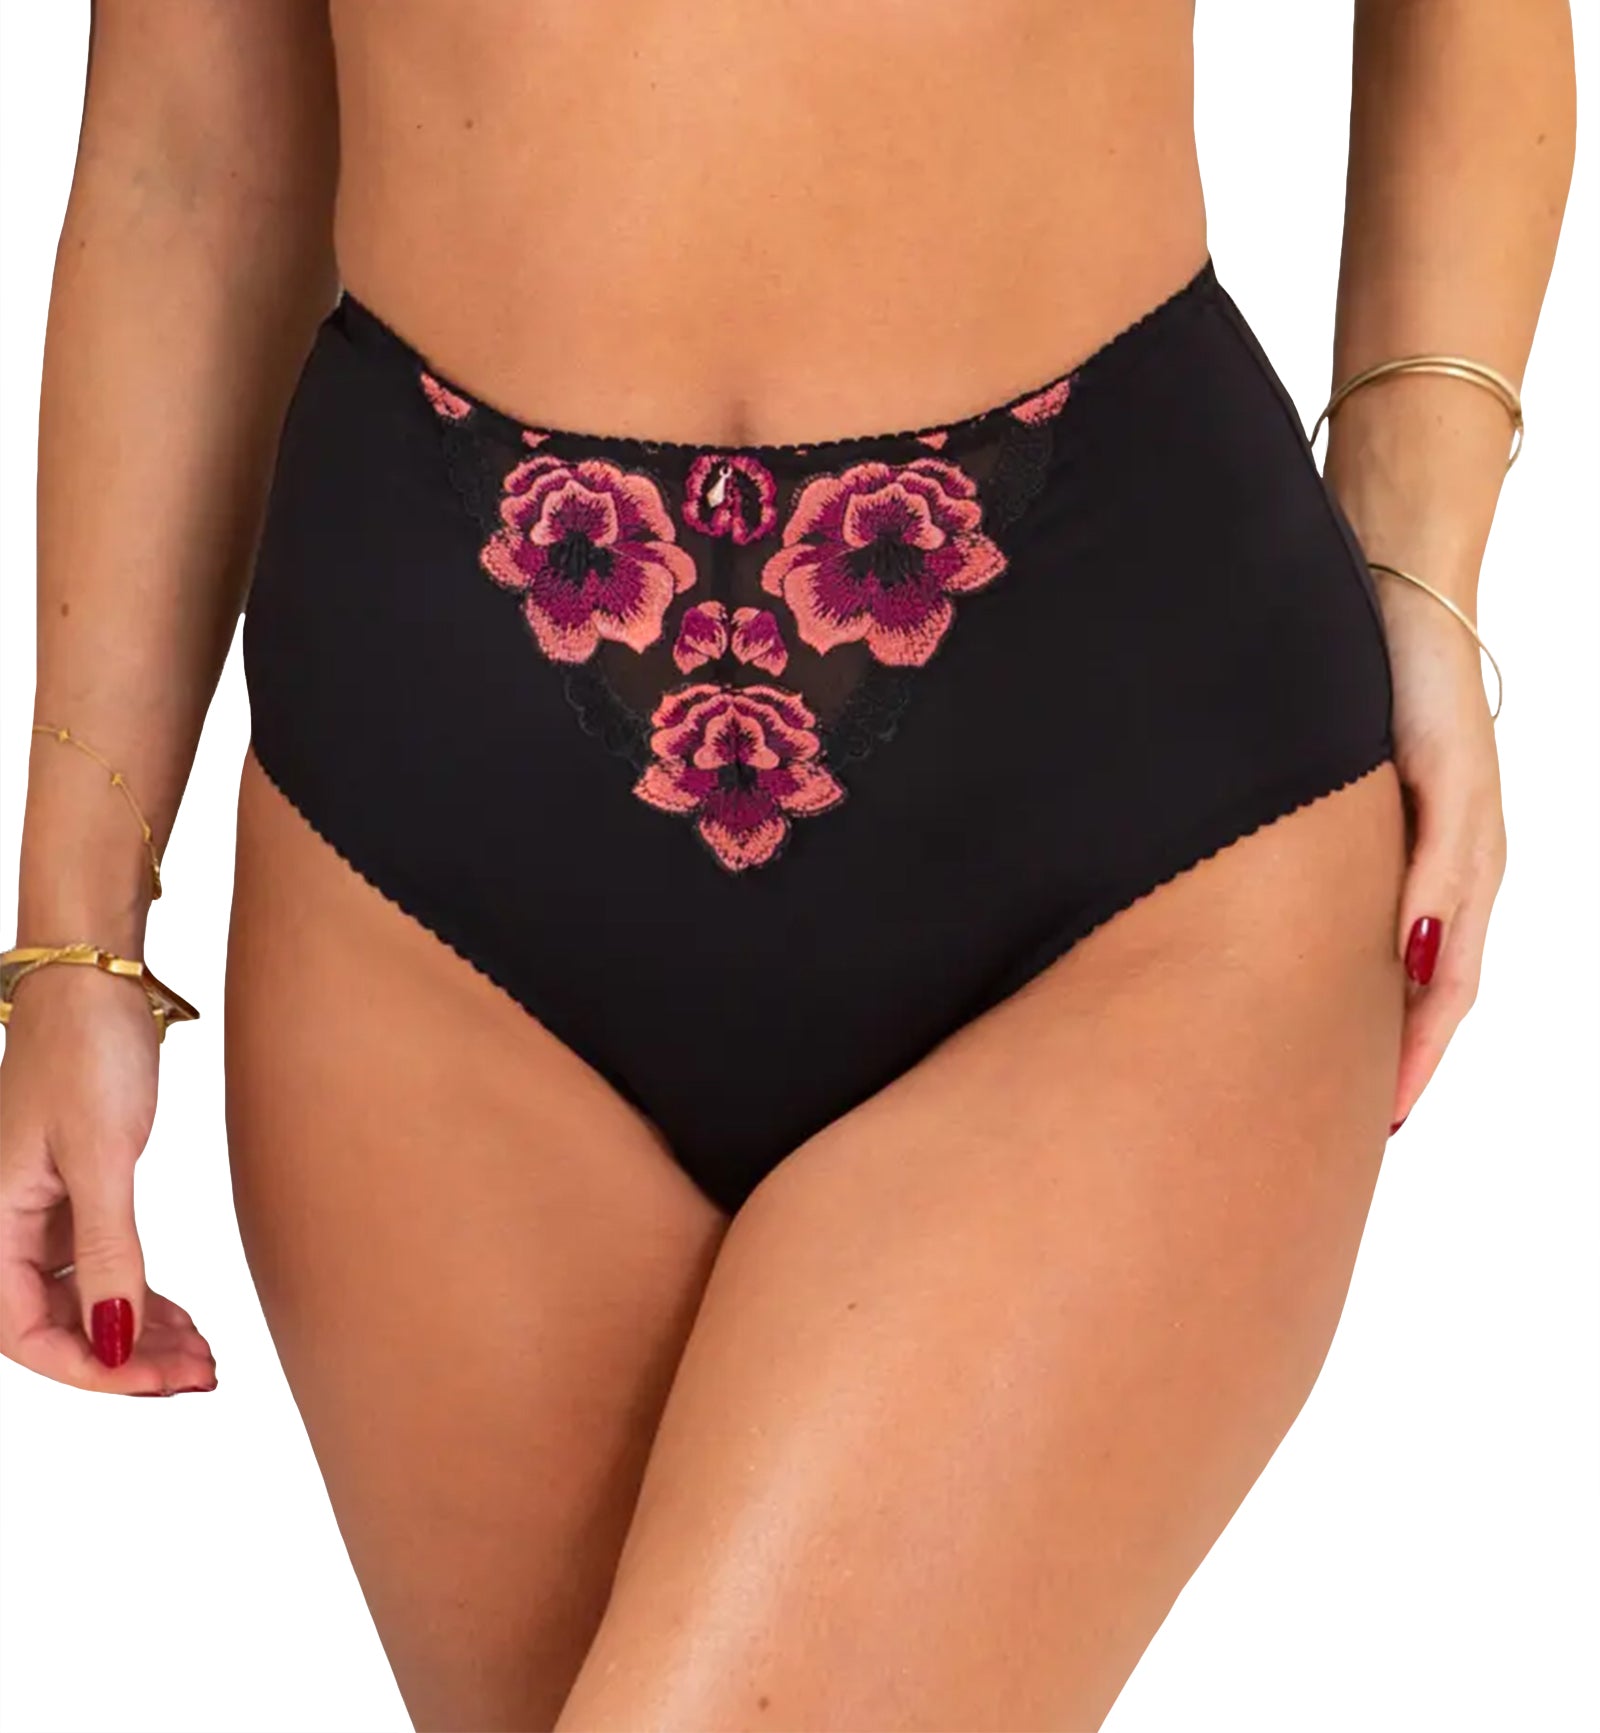 Pour Moi Soiree Embroidery High Waist Deep Brief (37102),Small,Black/Pink - Black/Pink,Small